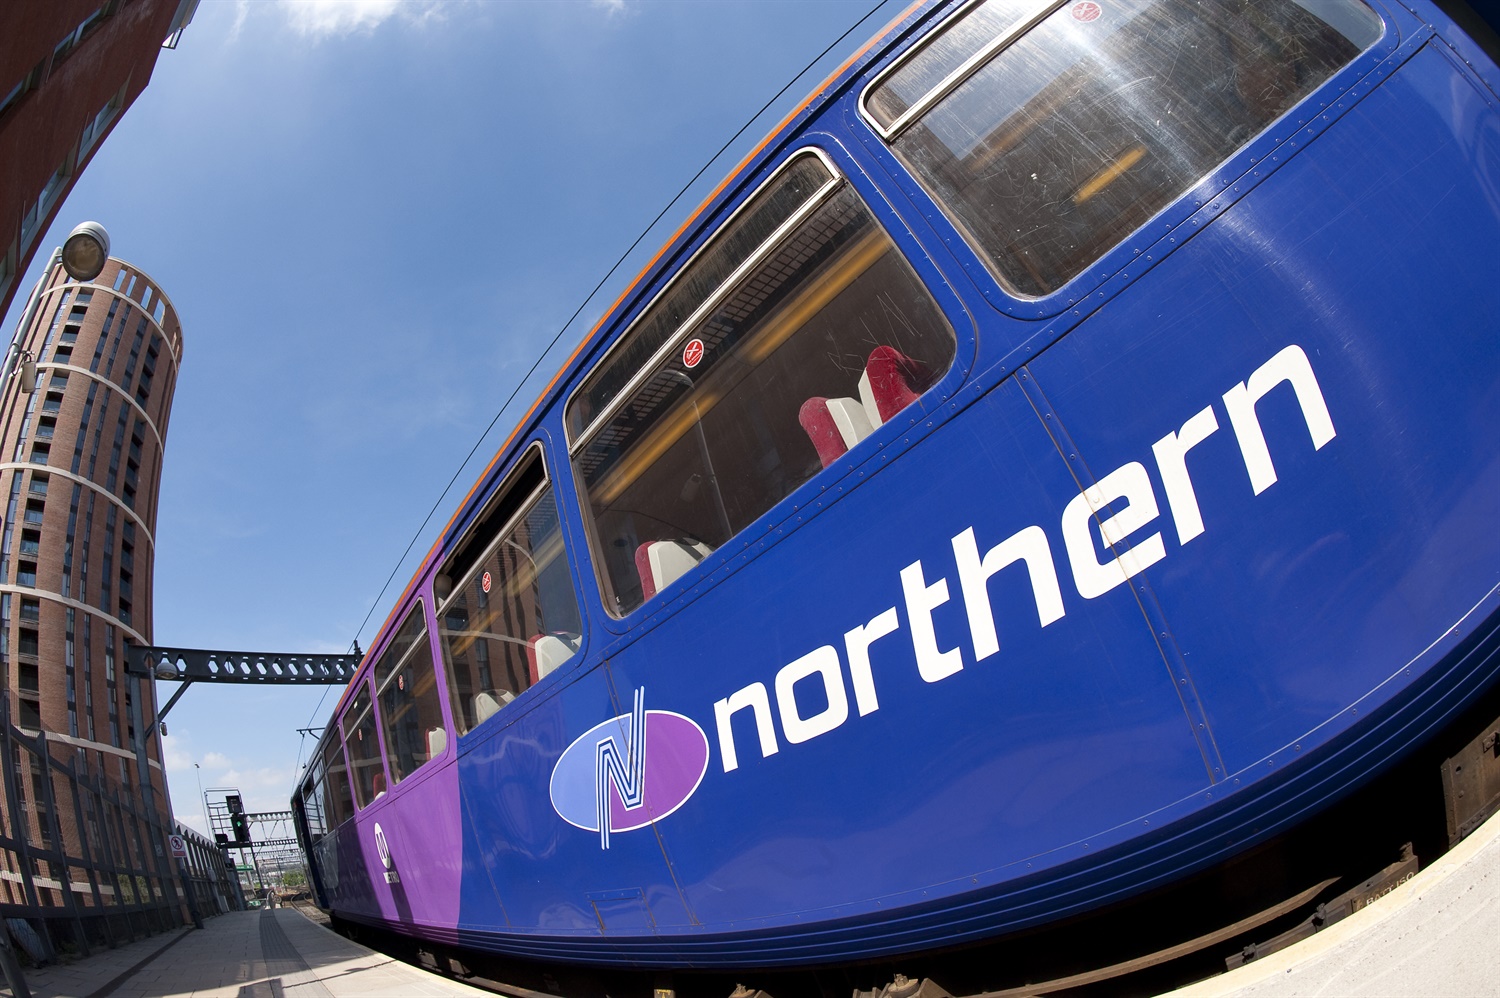 Trains on the Manchester-Preston line will not be electrified until 2019